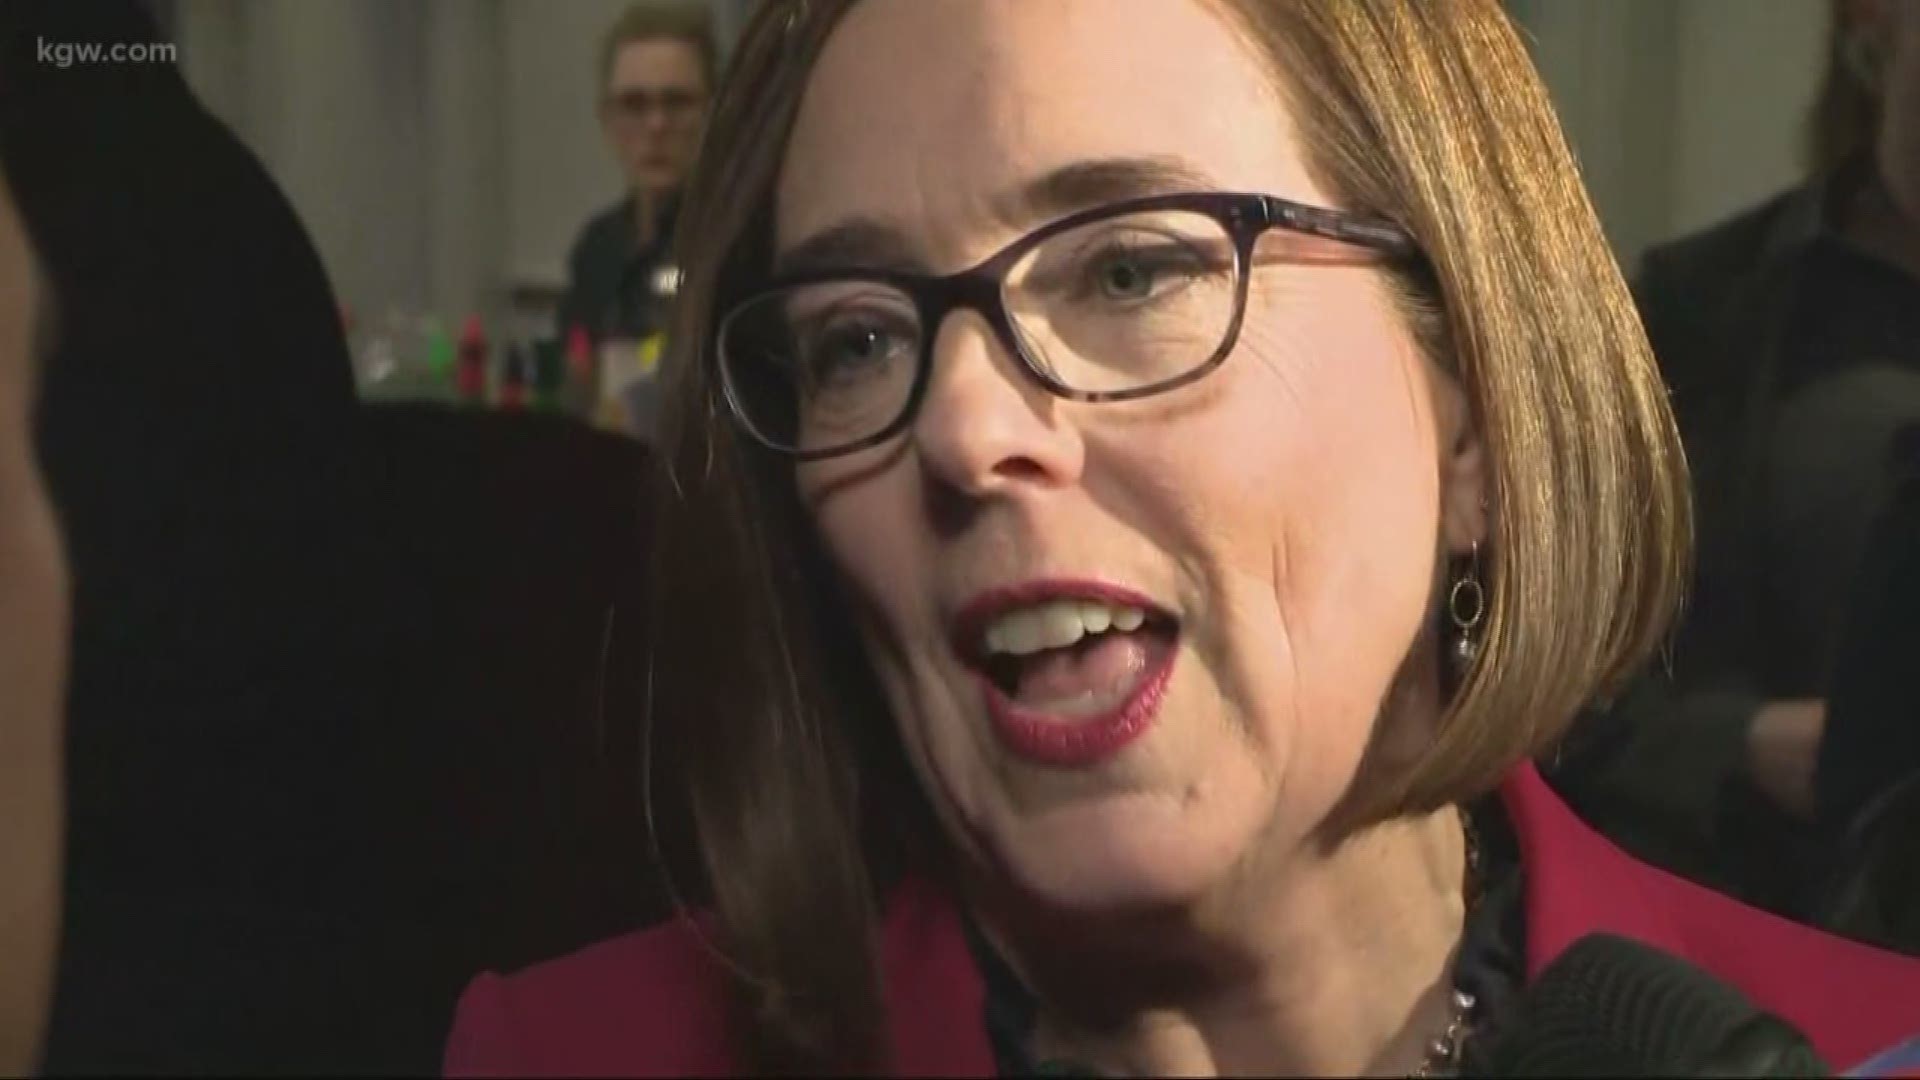 Oregon voters have elected Democrat Kate Brown to serve her first full term as governor.